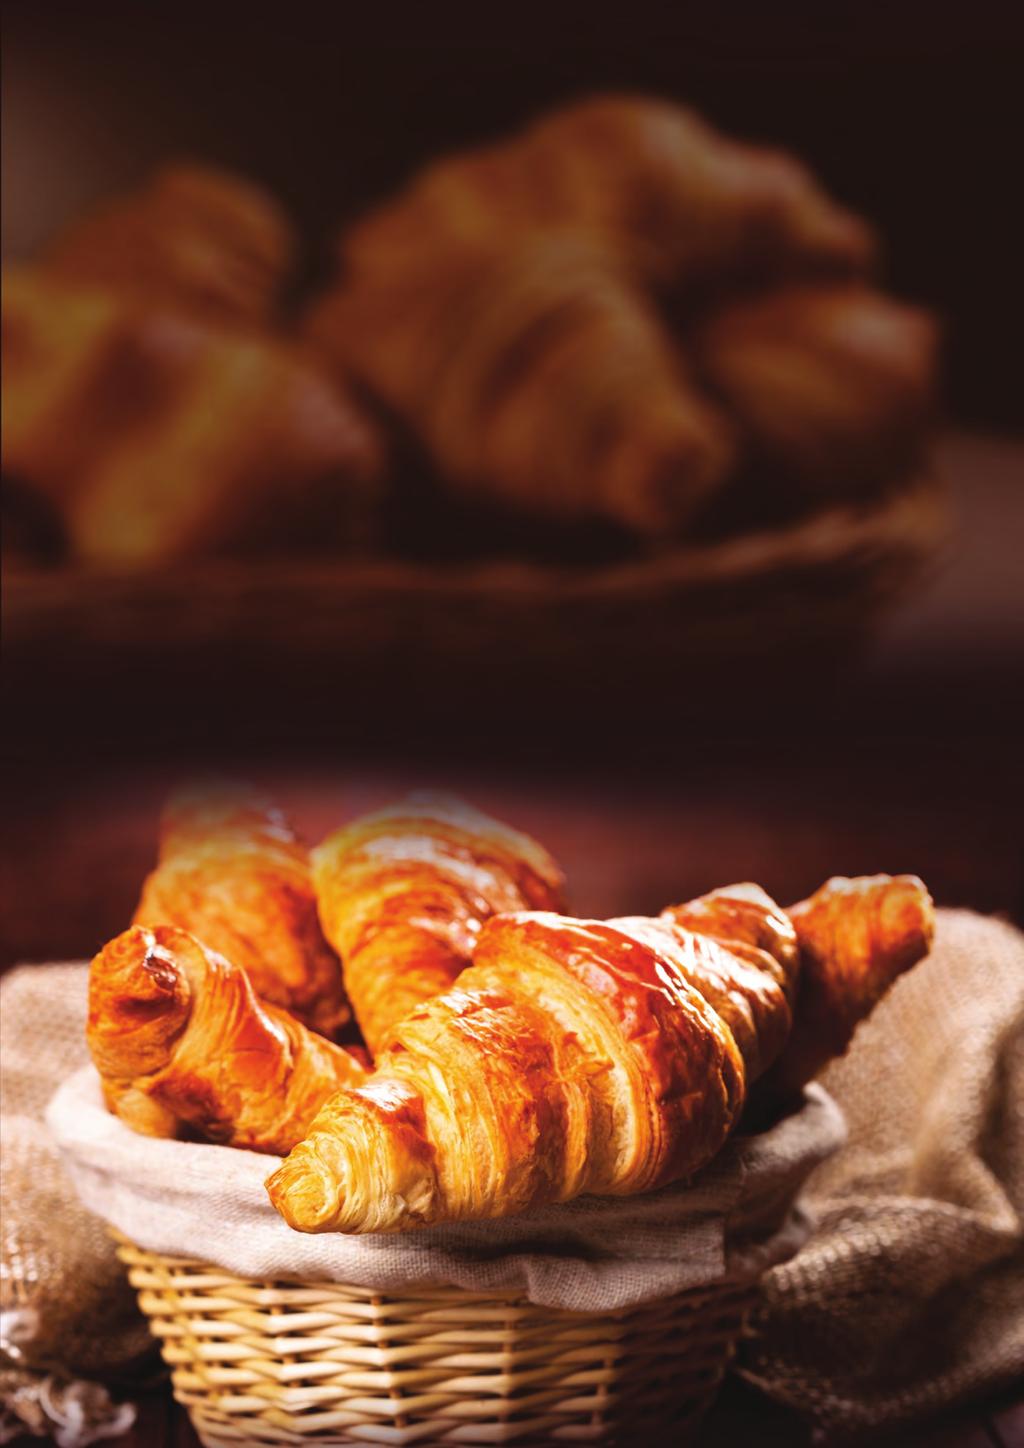 Plain, layered to create a flaky texture, our croissant is perfect addition to your daily life from breakfast to late night snacking.